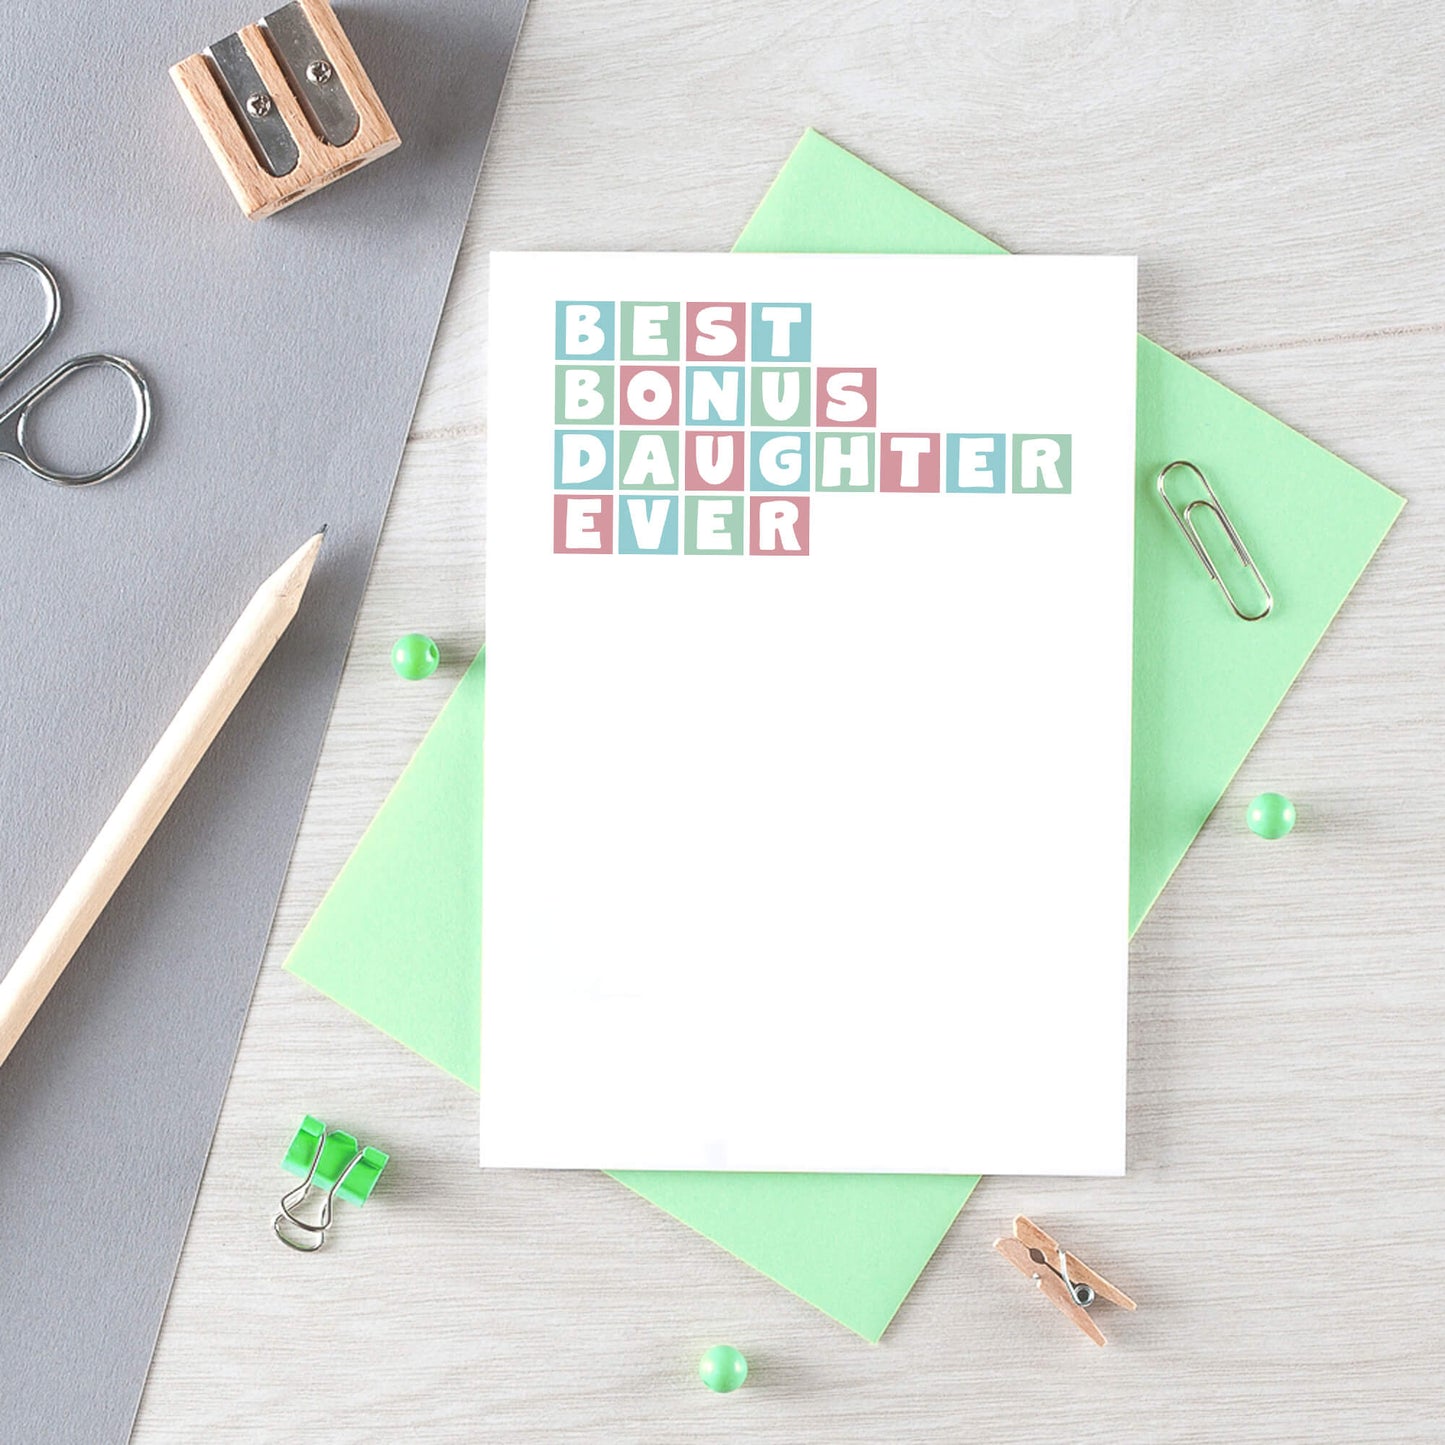 Best Bonus Daughter Ever Card by SixElevenCreations. Product Code SE0362A6